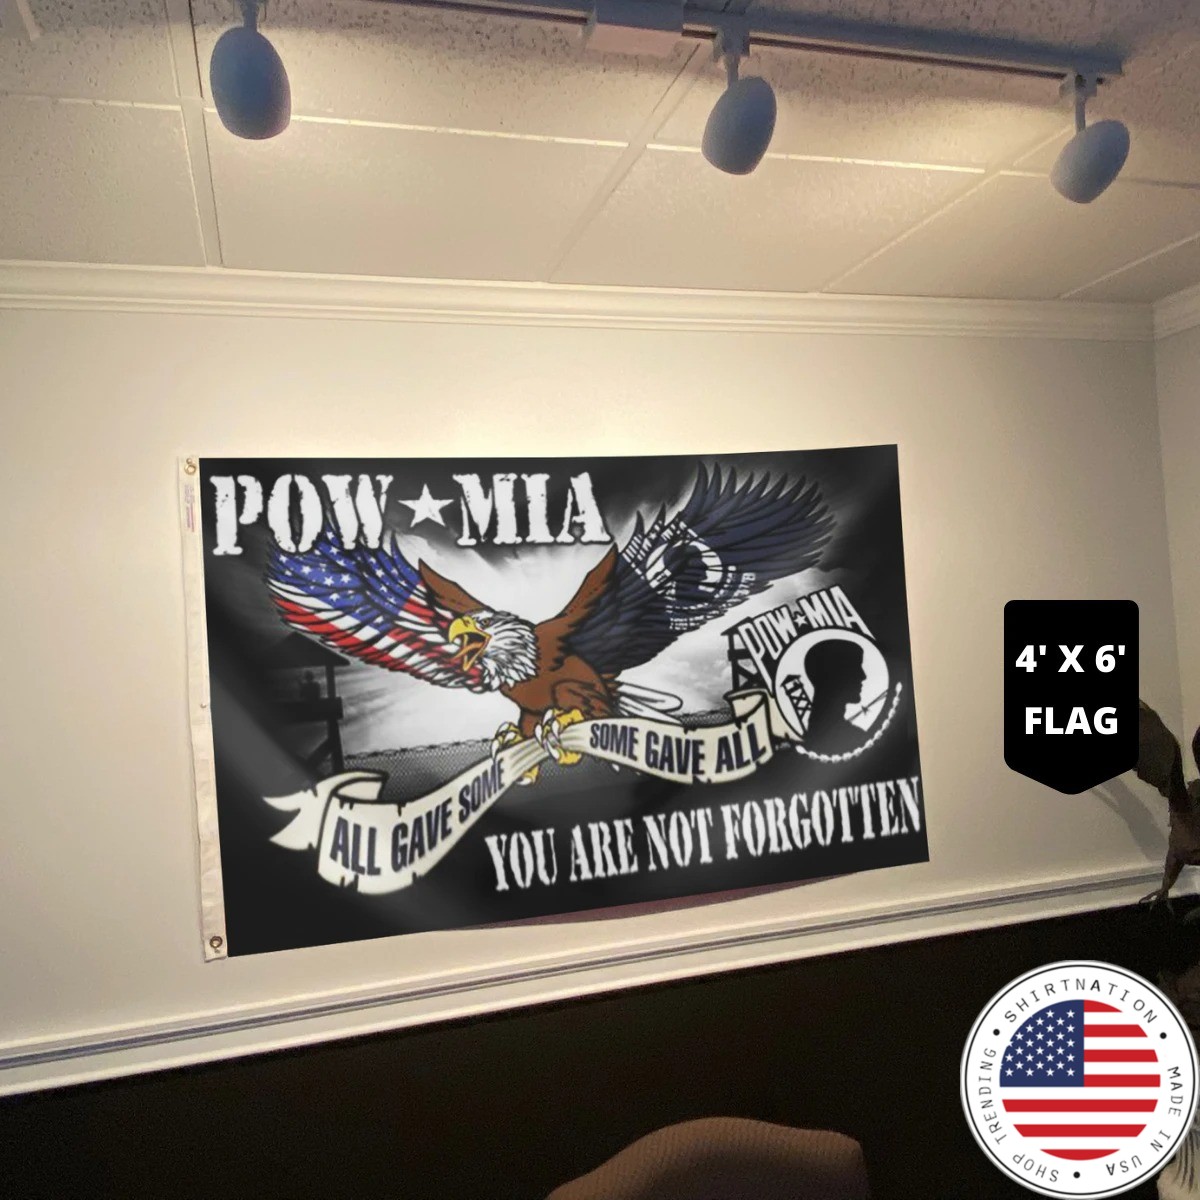 Pow mid all gave some some gave all you are not forgotten flag2